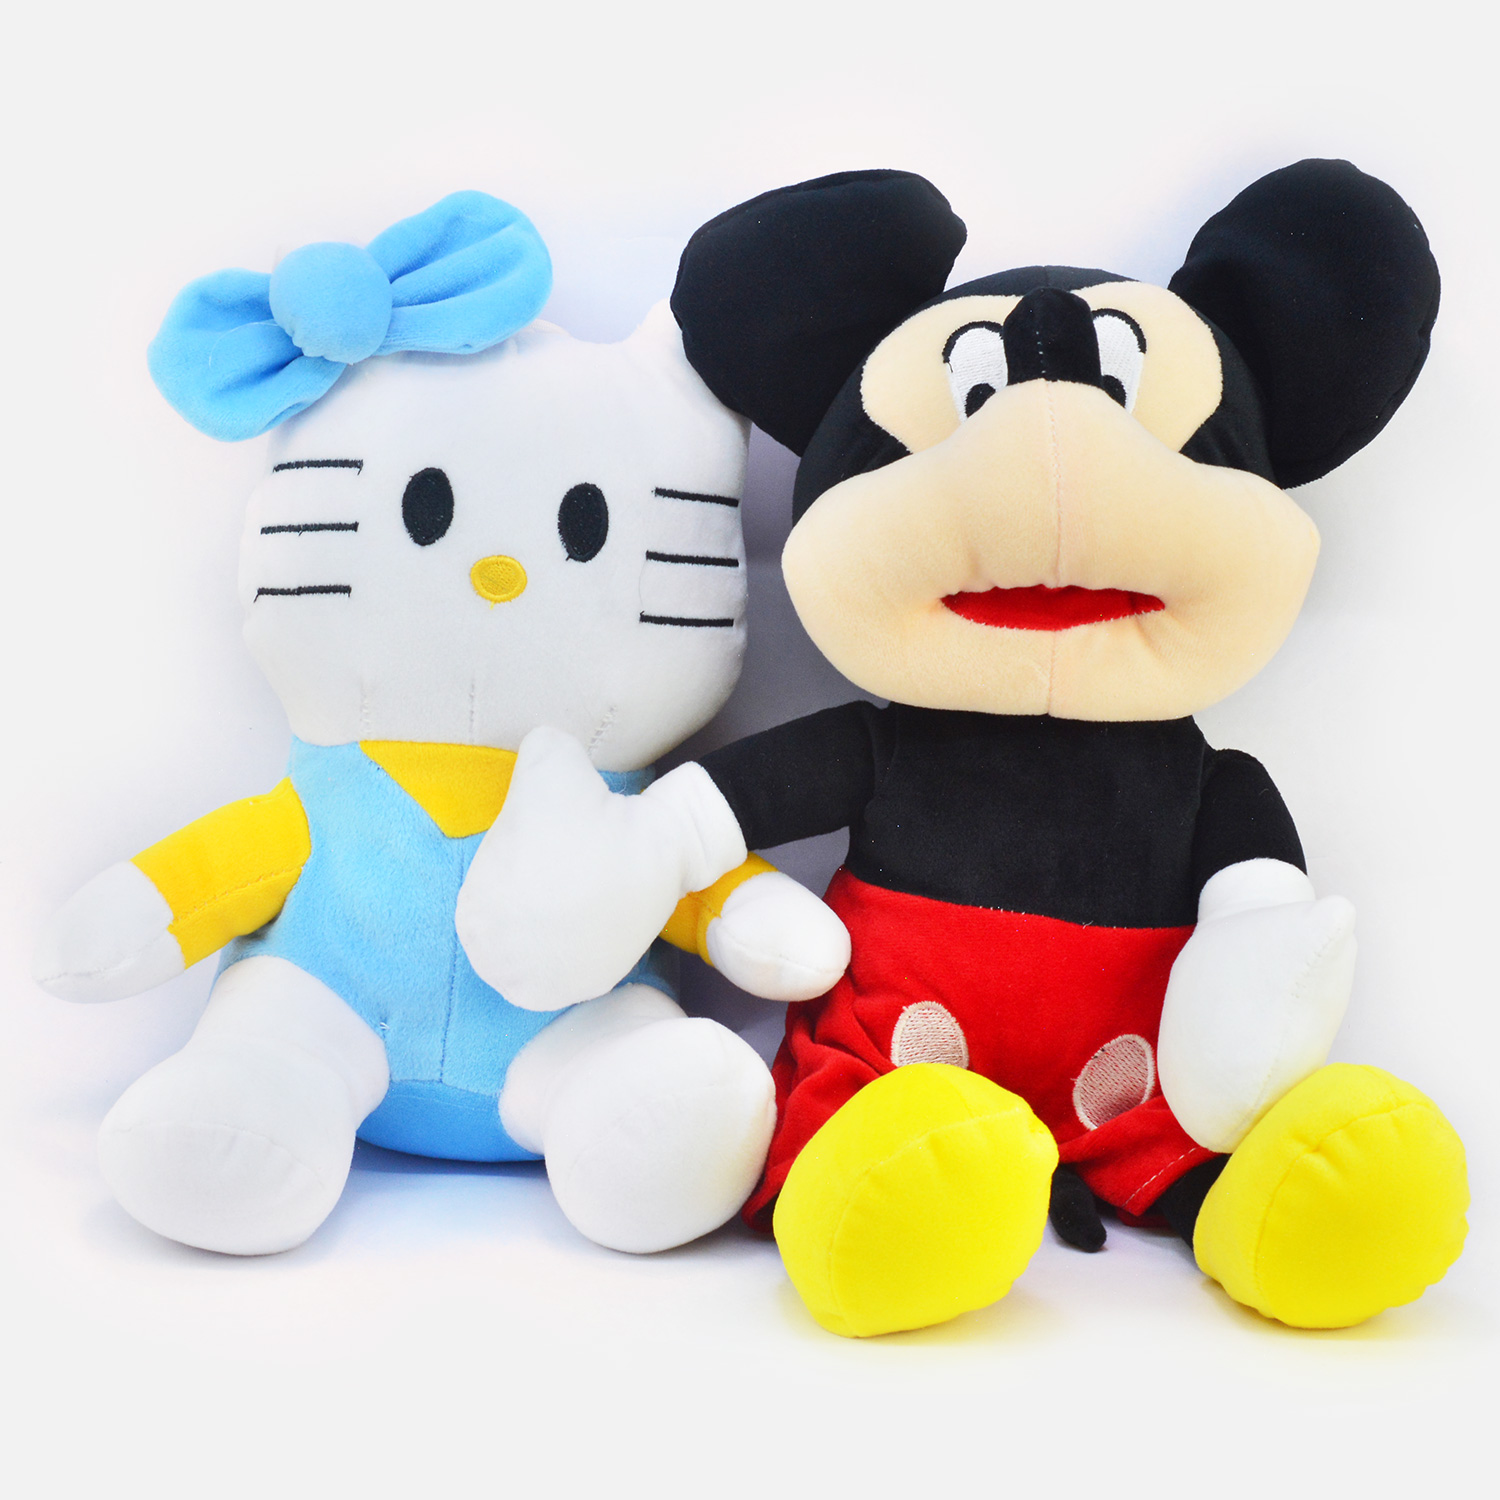 Fabulous Mickey Mouse with Kitty Doll Soft Teddy